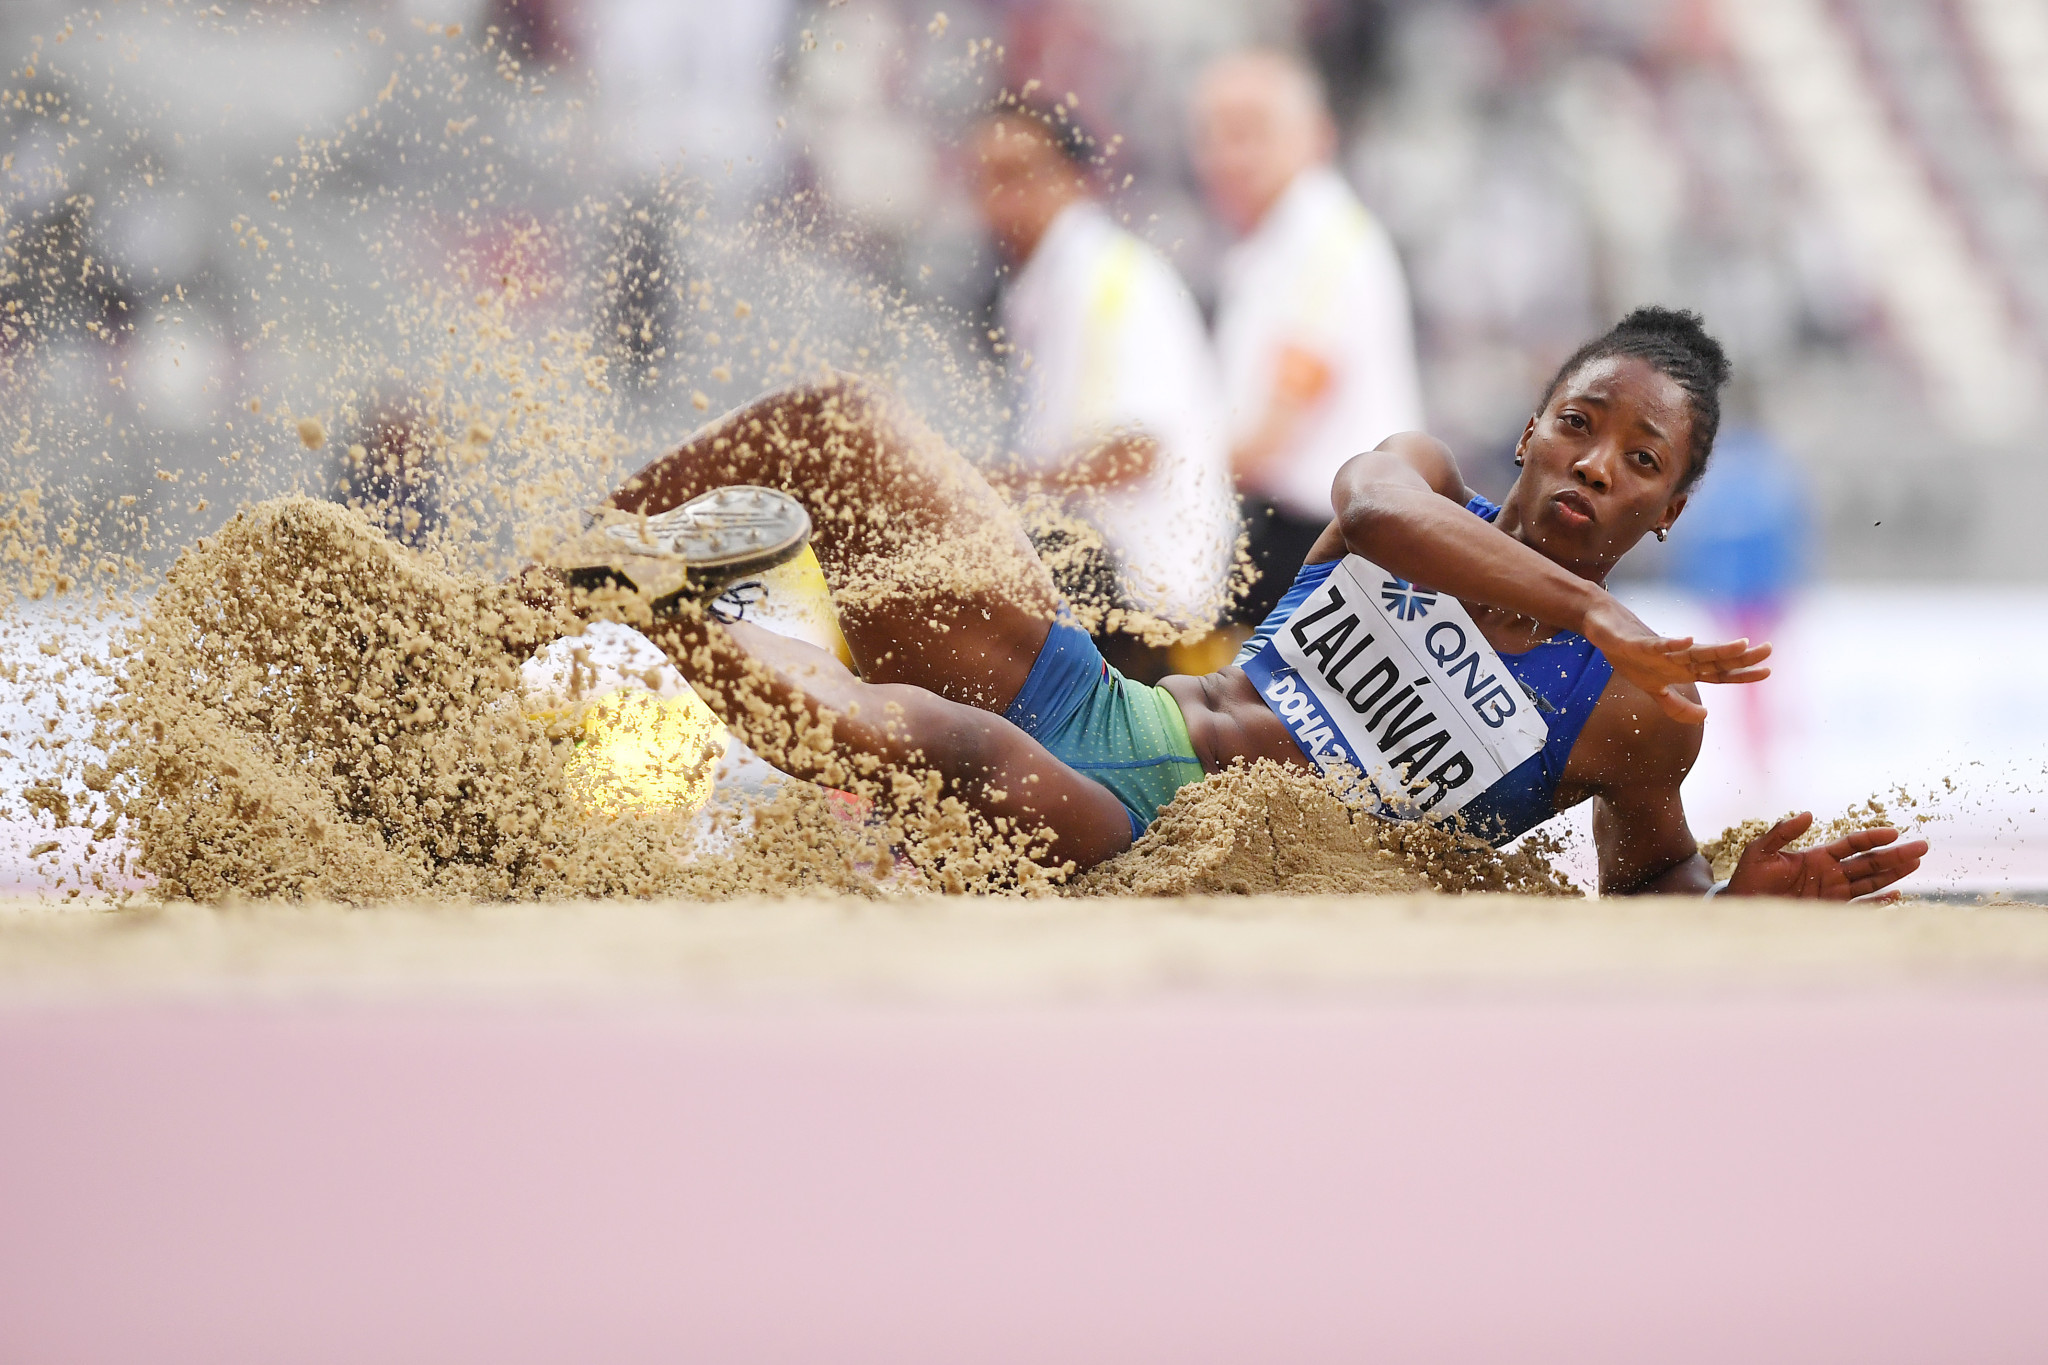 Triple jumper Liuba Zaldívar is continuing her preparations in Portoviejo for a further month ahead of Tokyo 2020 ©Getty Images